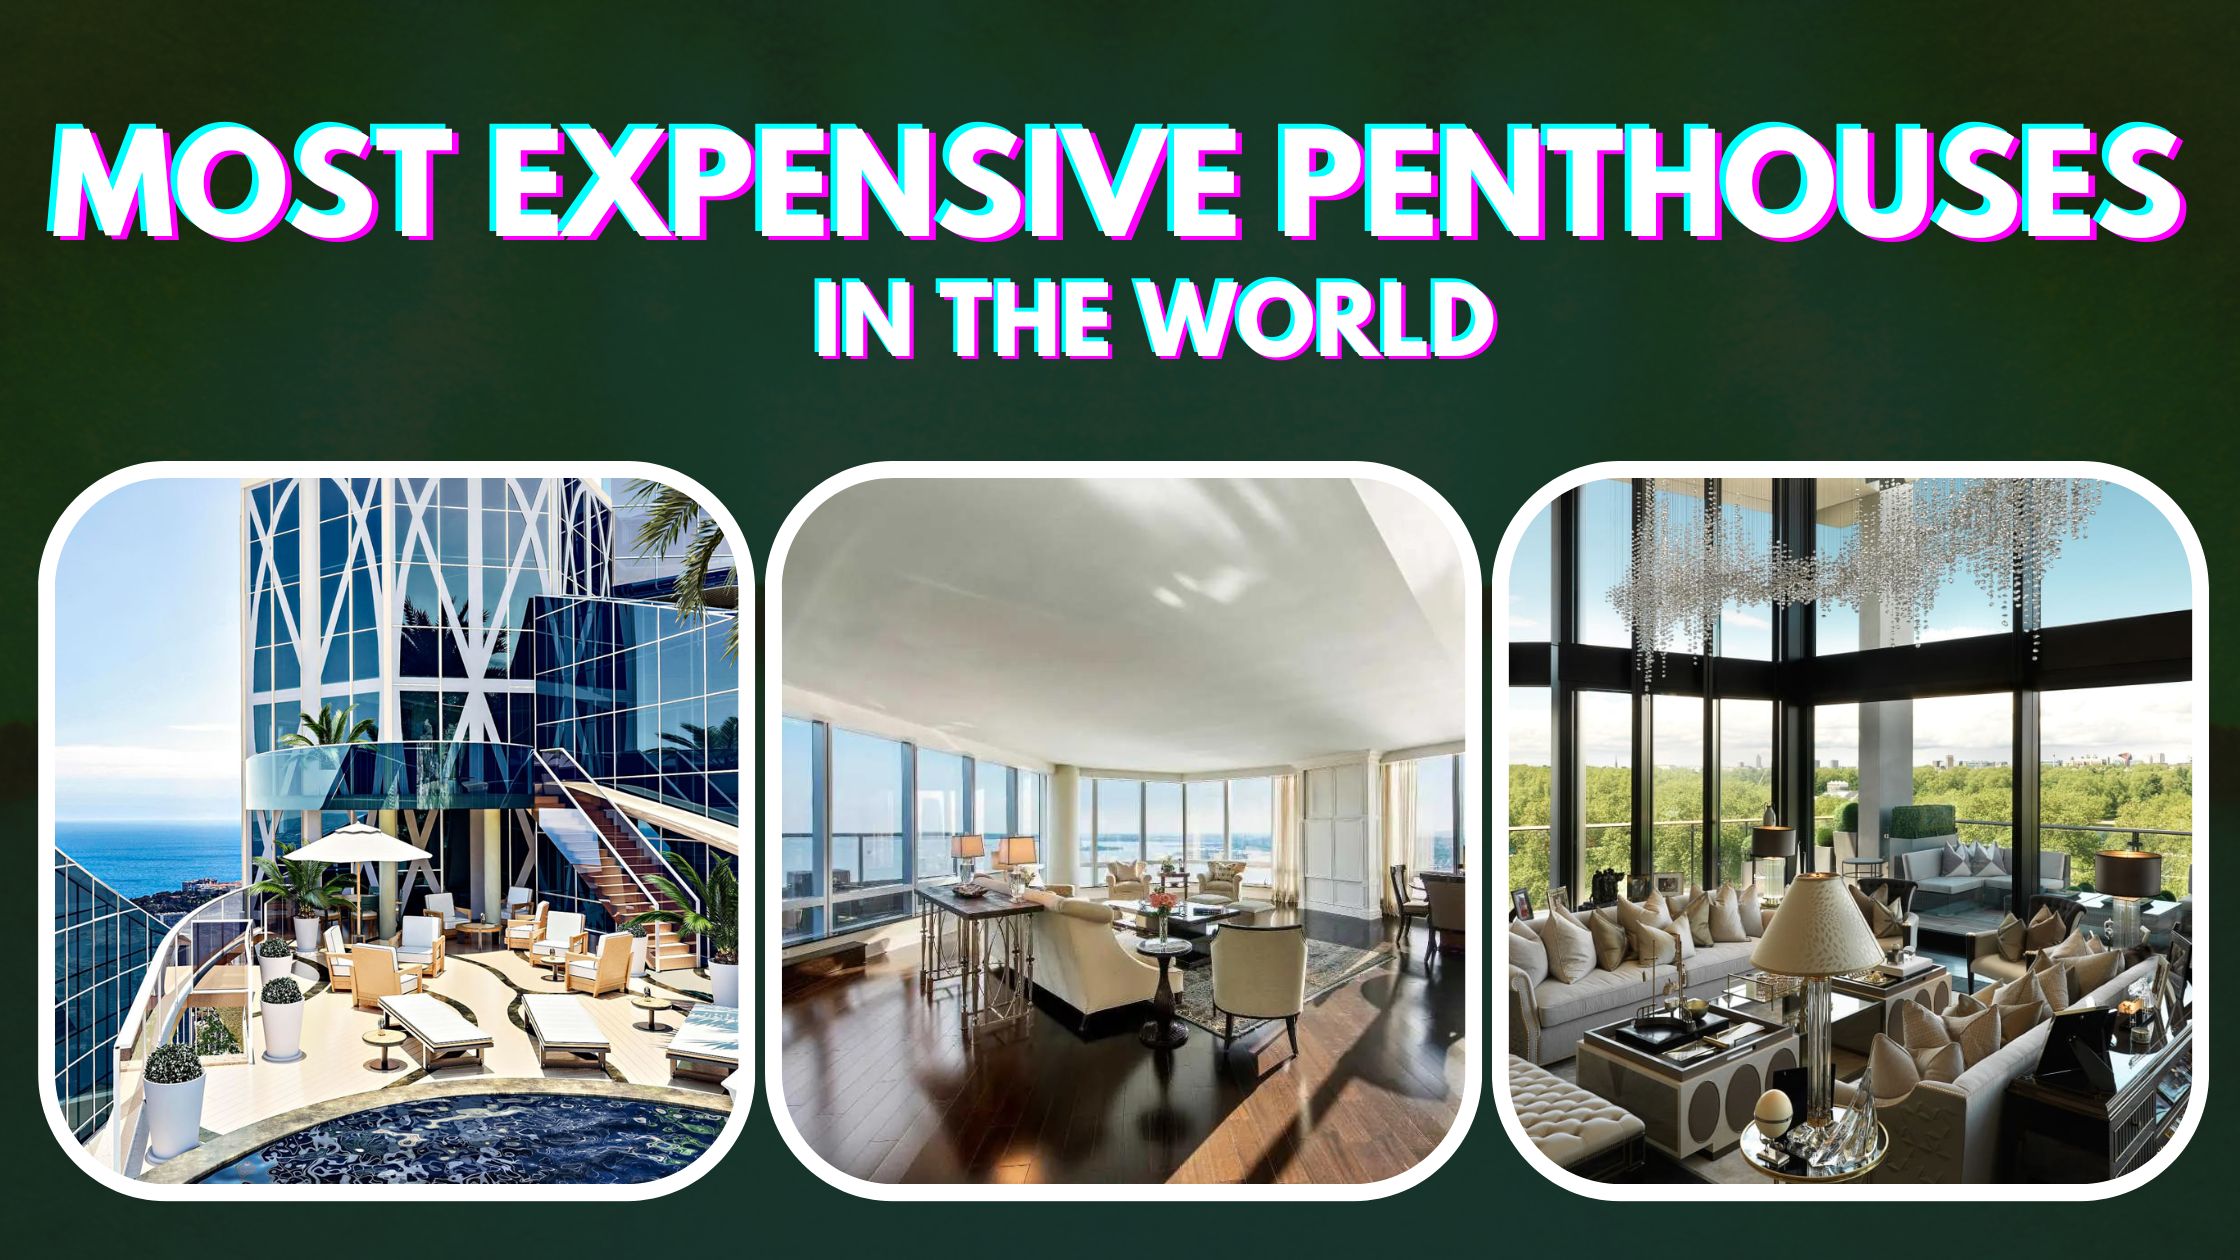 Most Expensive Penthouses in the World